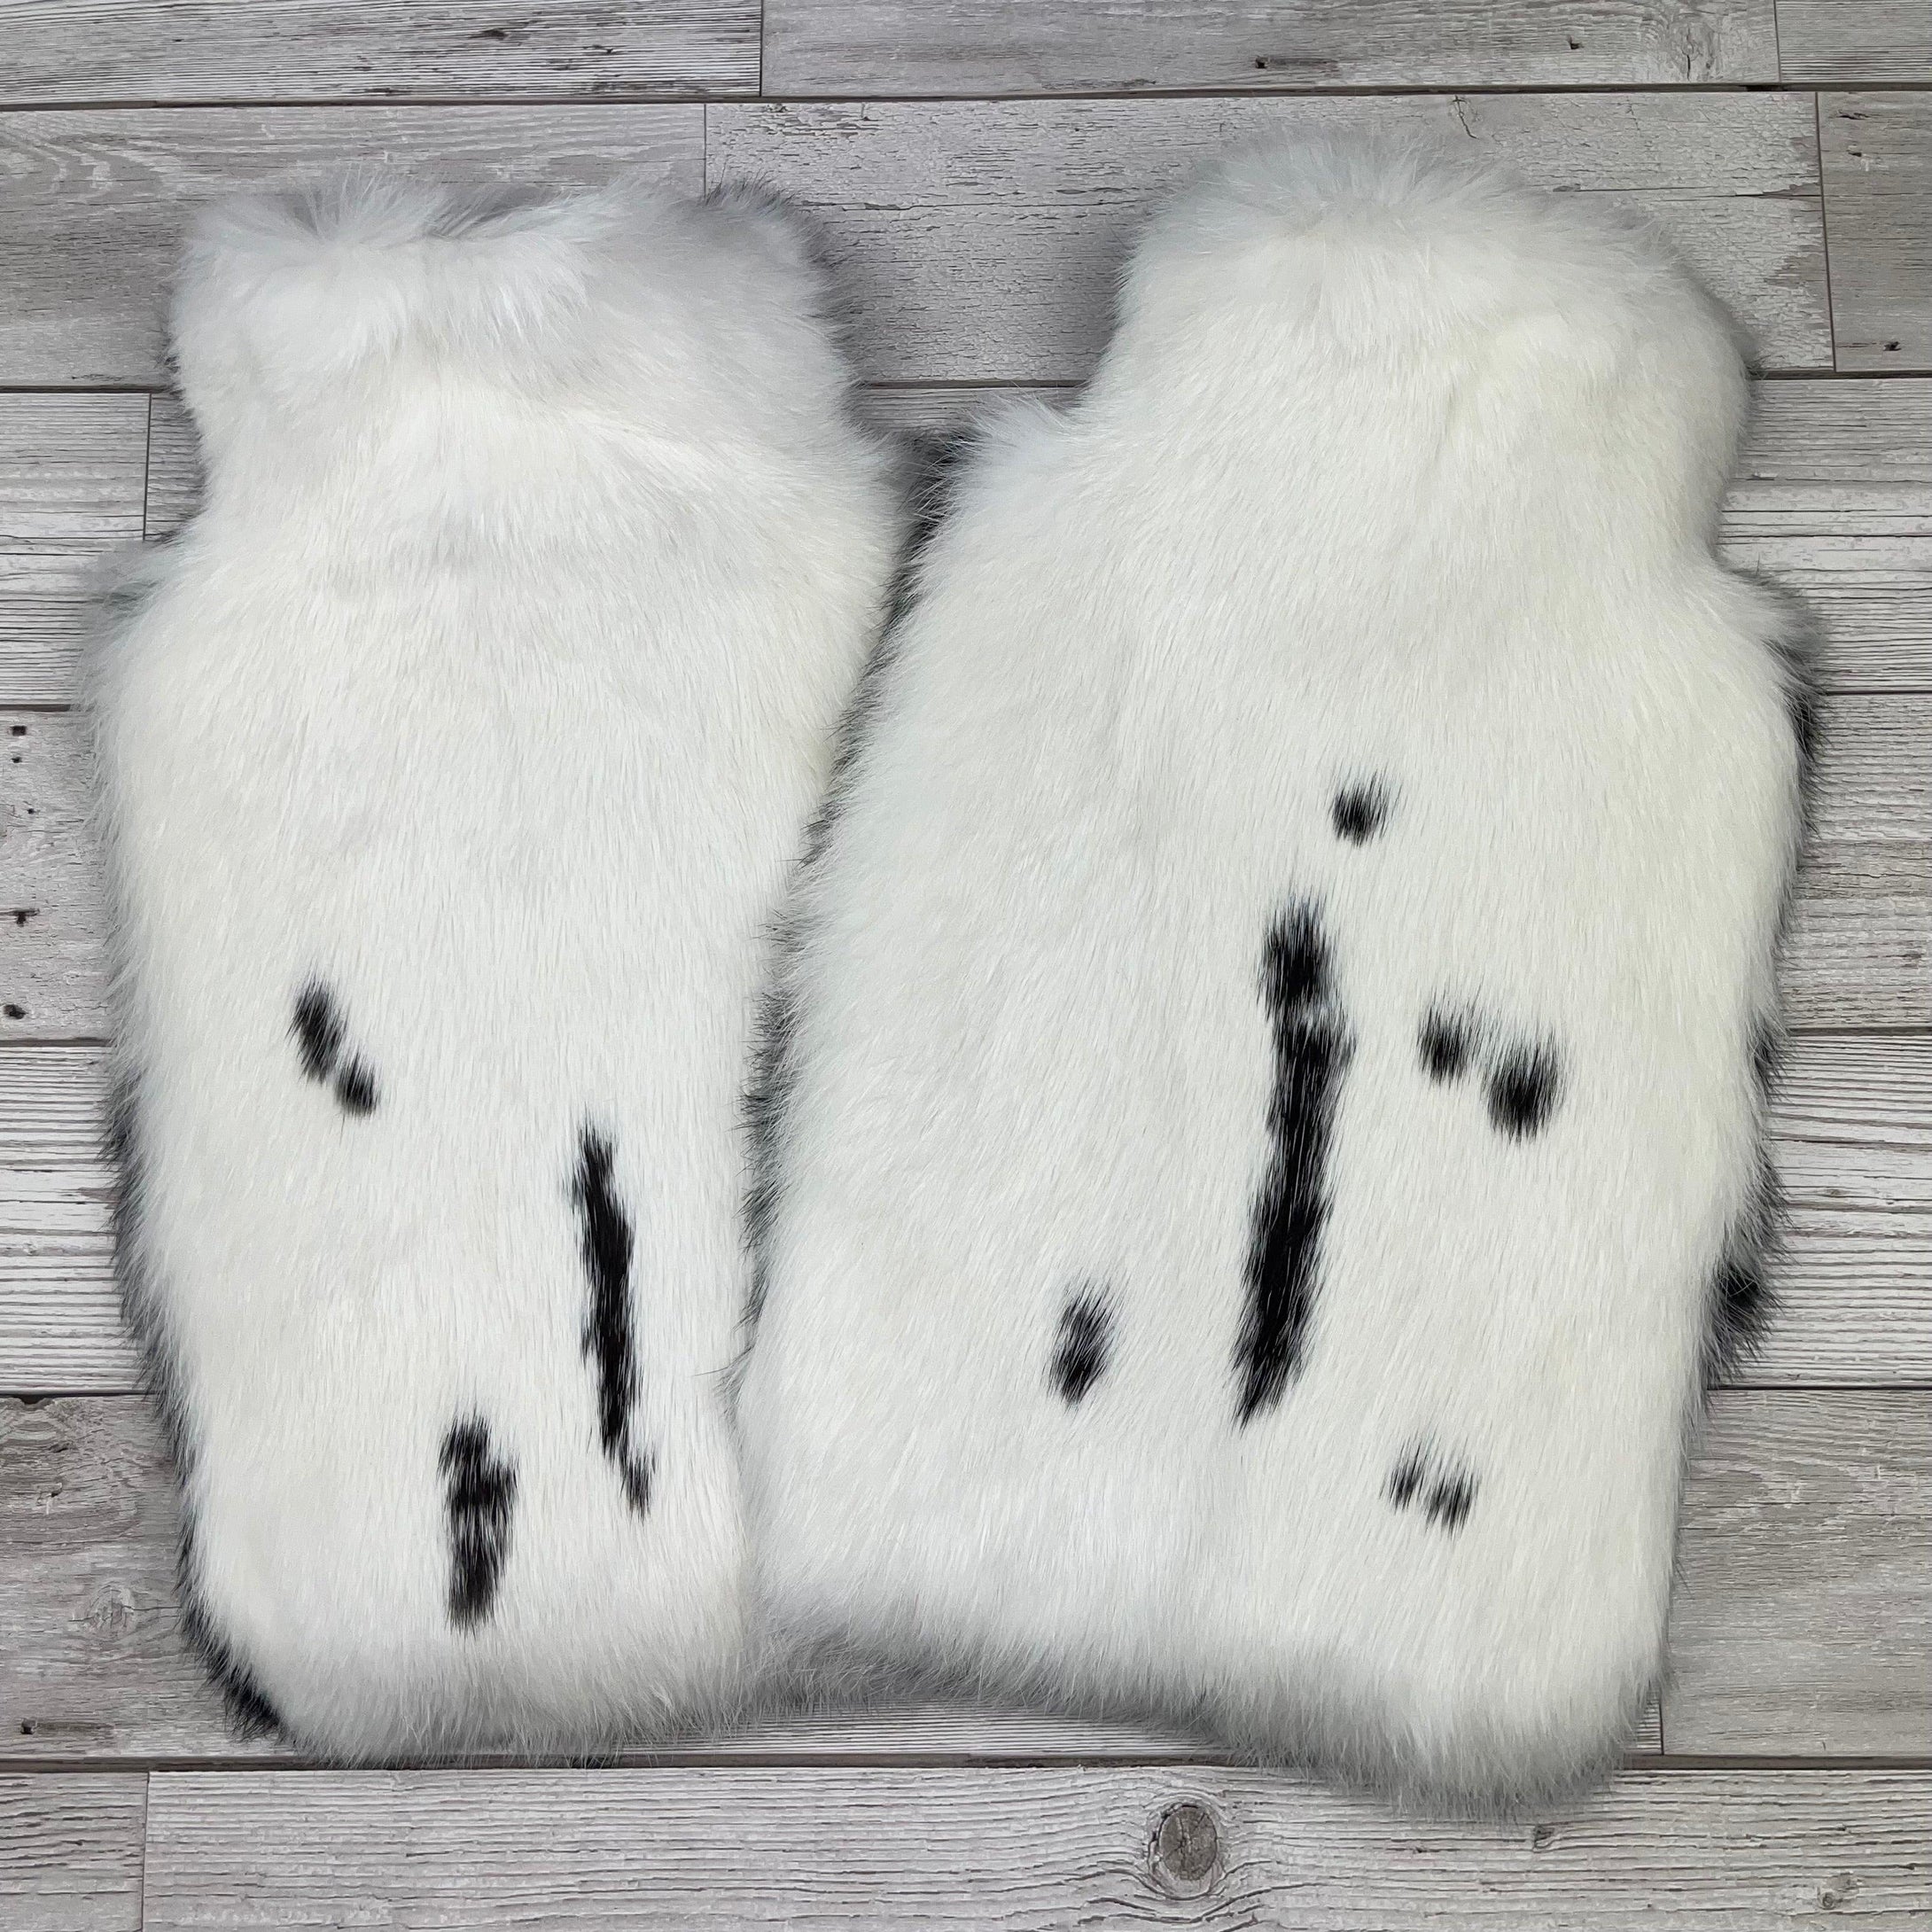 Luxury Gift set of Real Fur Hot Water Bottles - #403 - The Fur Hot Water Bottle Company